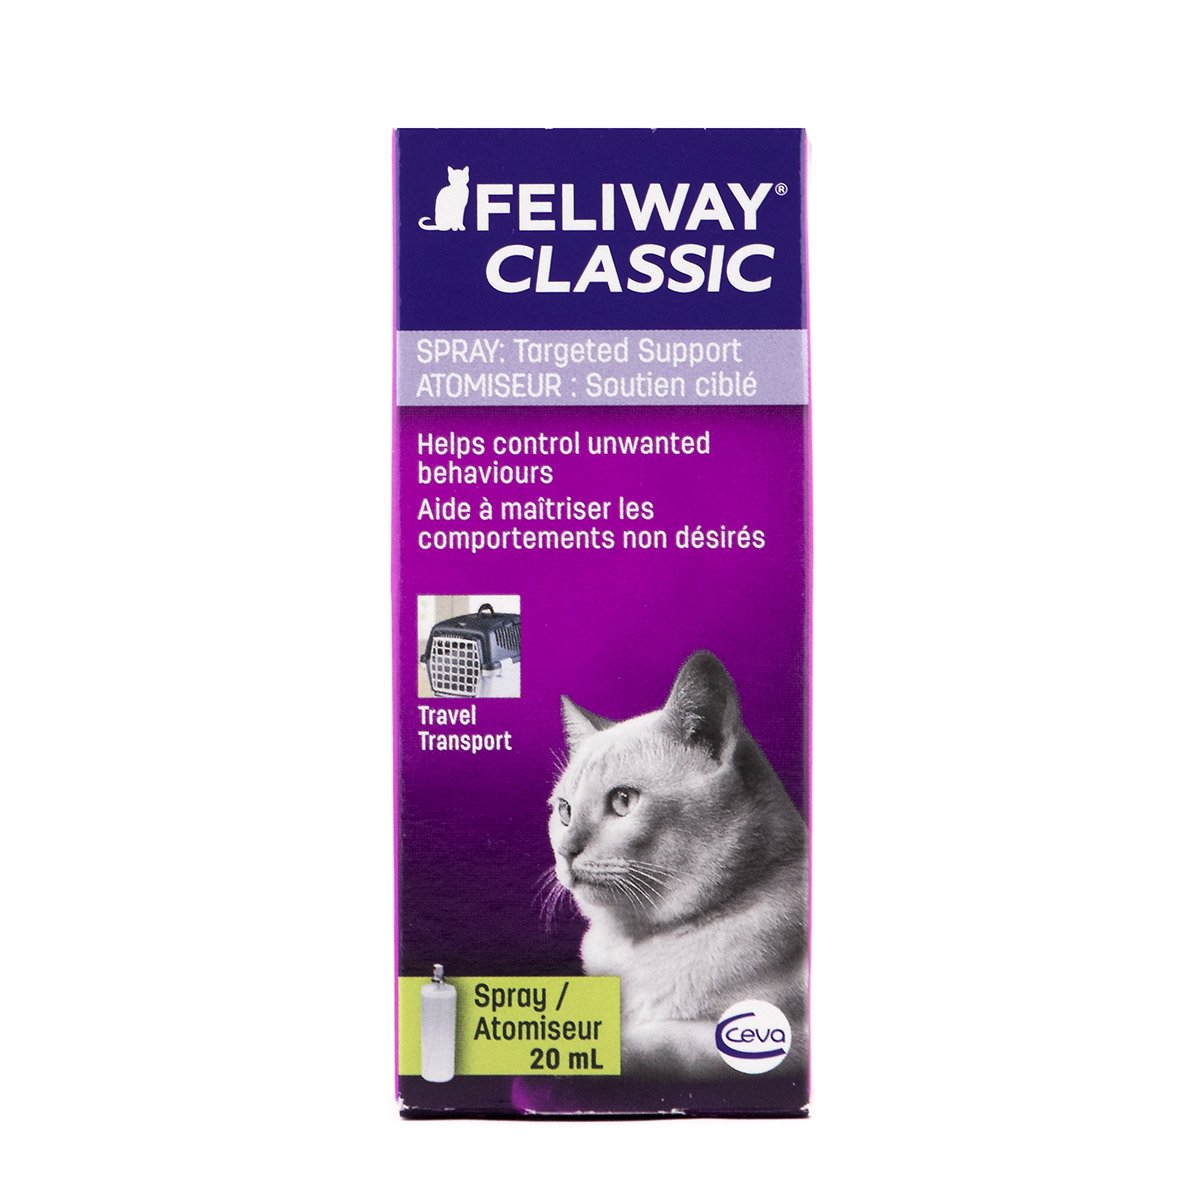 FELIWAY Classic Home Travel Spray for Cats